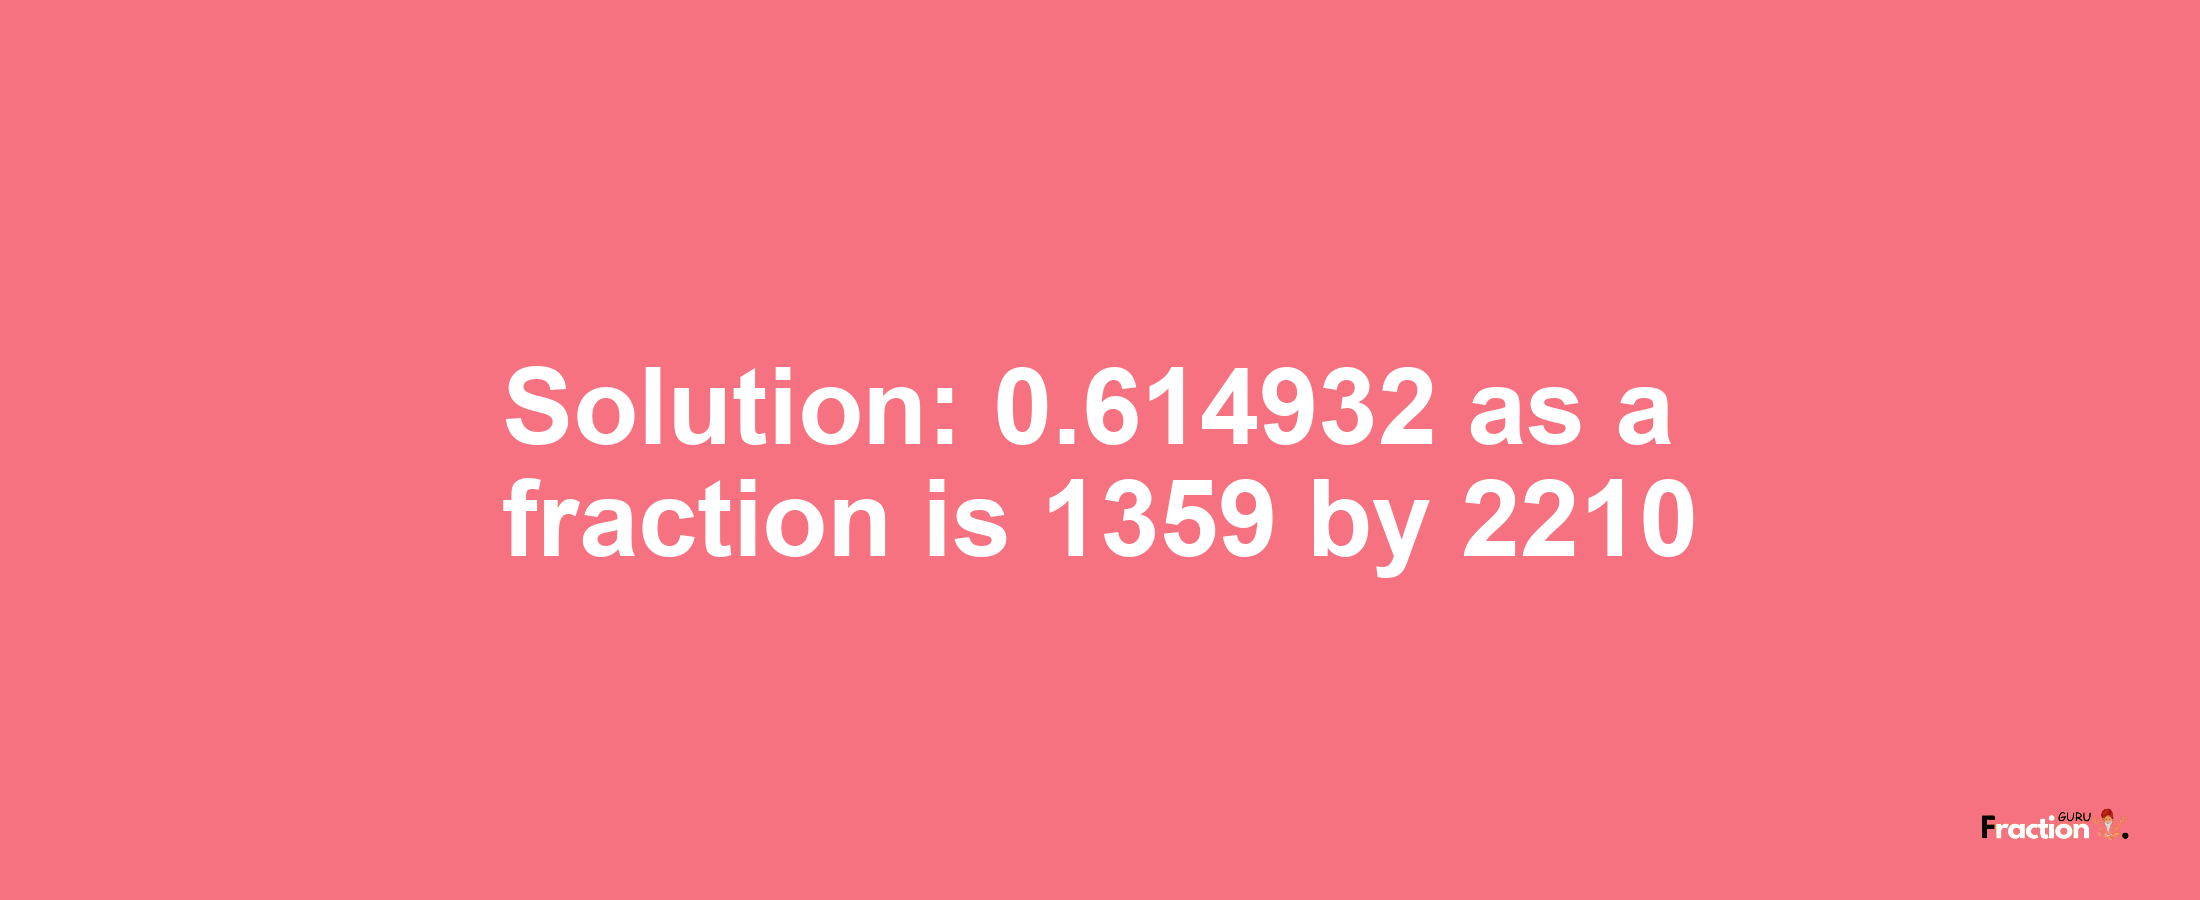 Solution:0.614932 as a fraction is 1359/2210